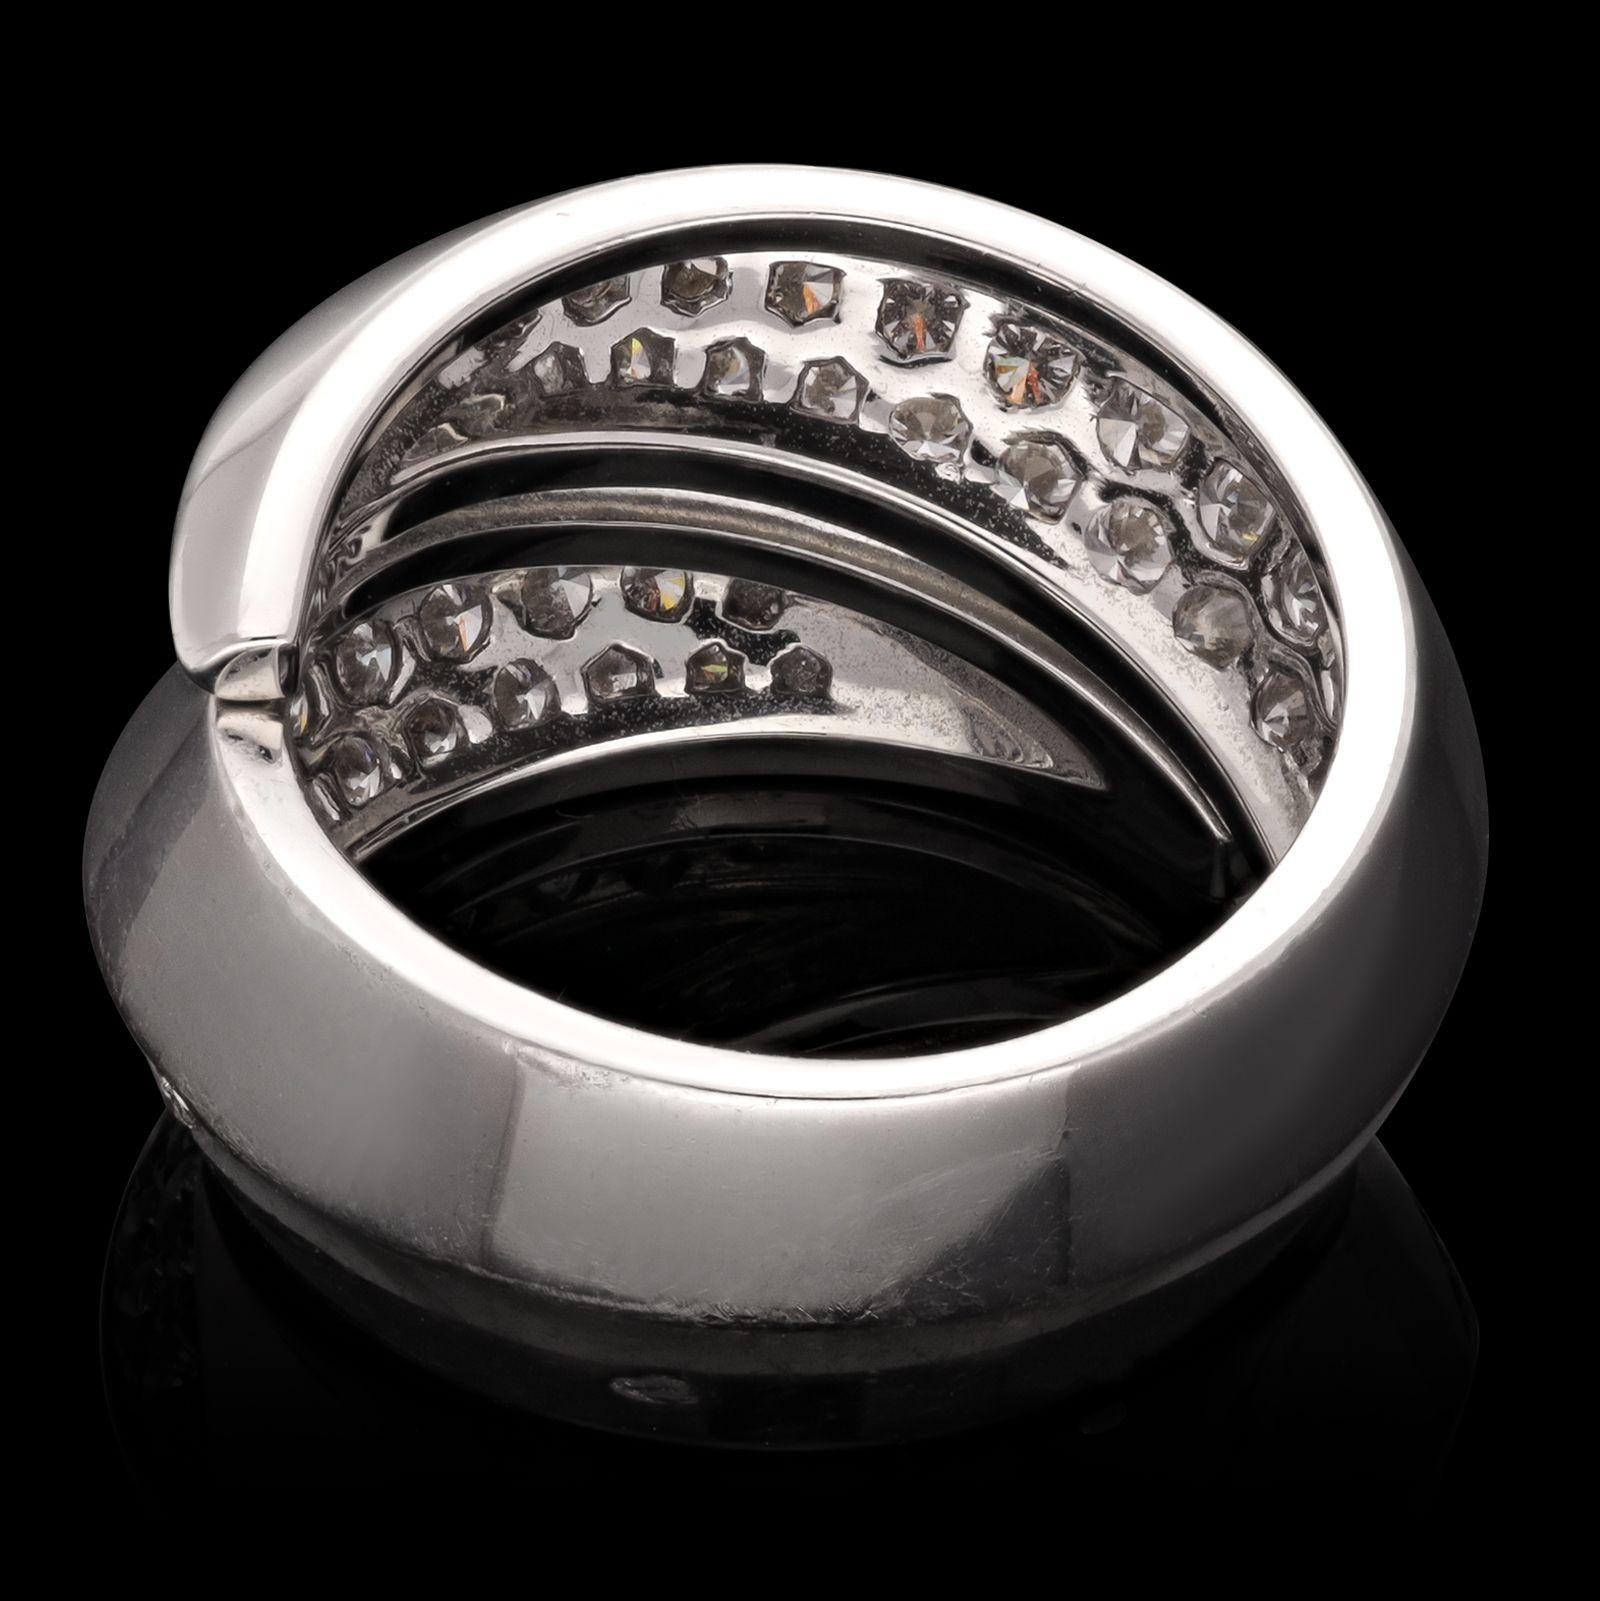 Brilliant Cut Cartier Panthère Griffe 18ct White Gold and Diamond Crossover Ring, circa 2000s For Sale